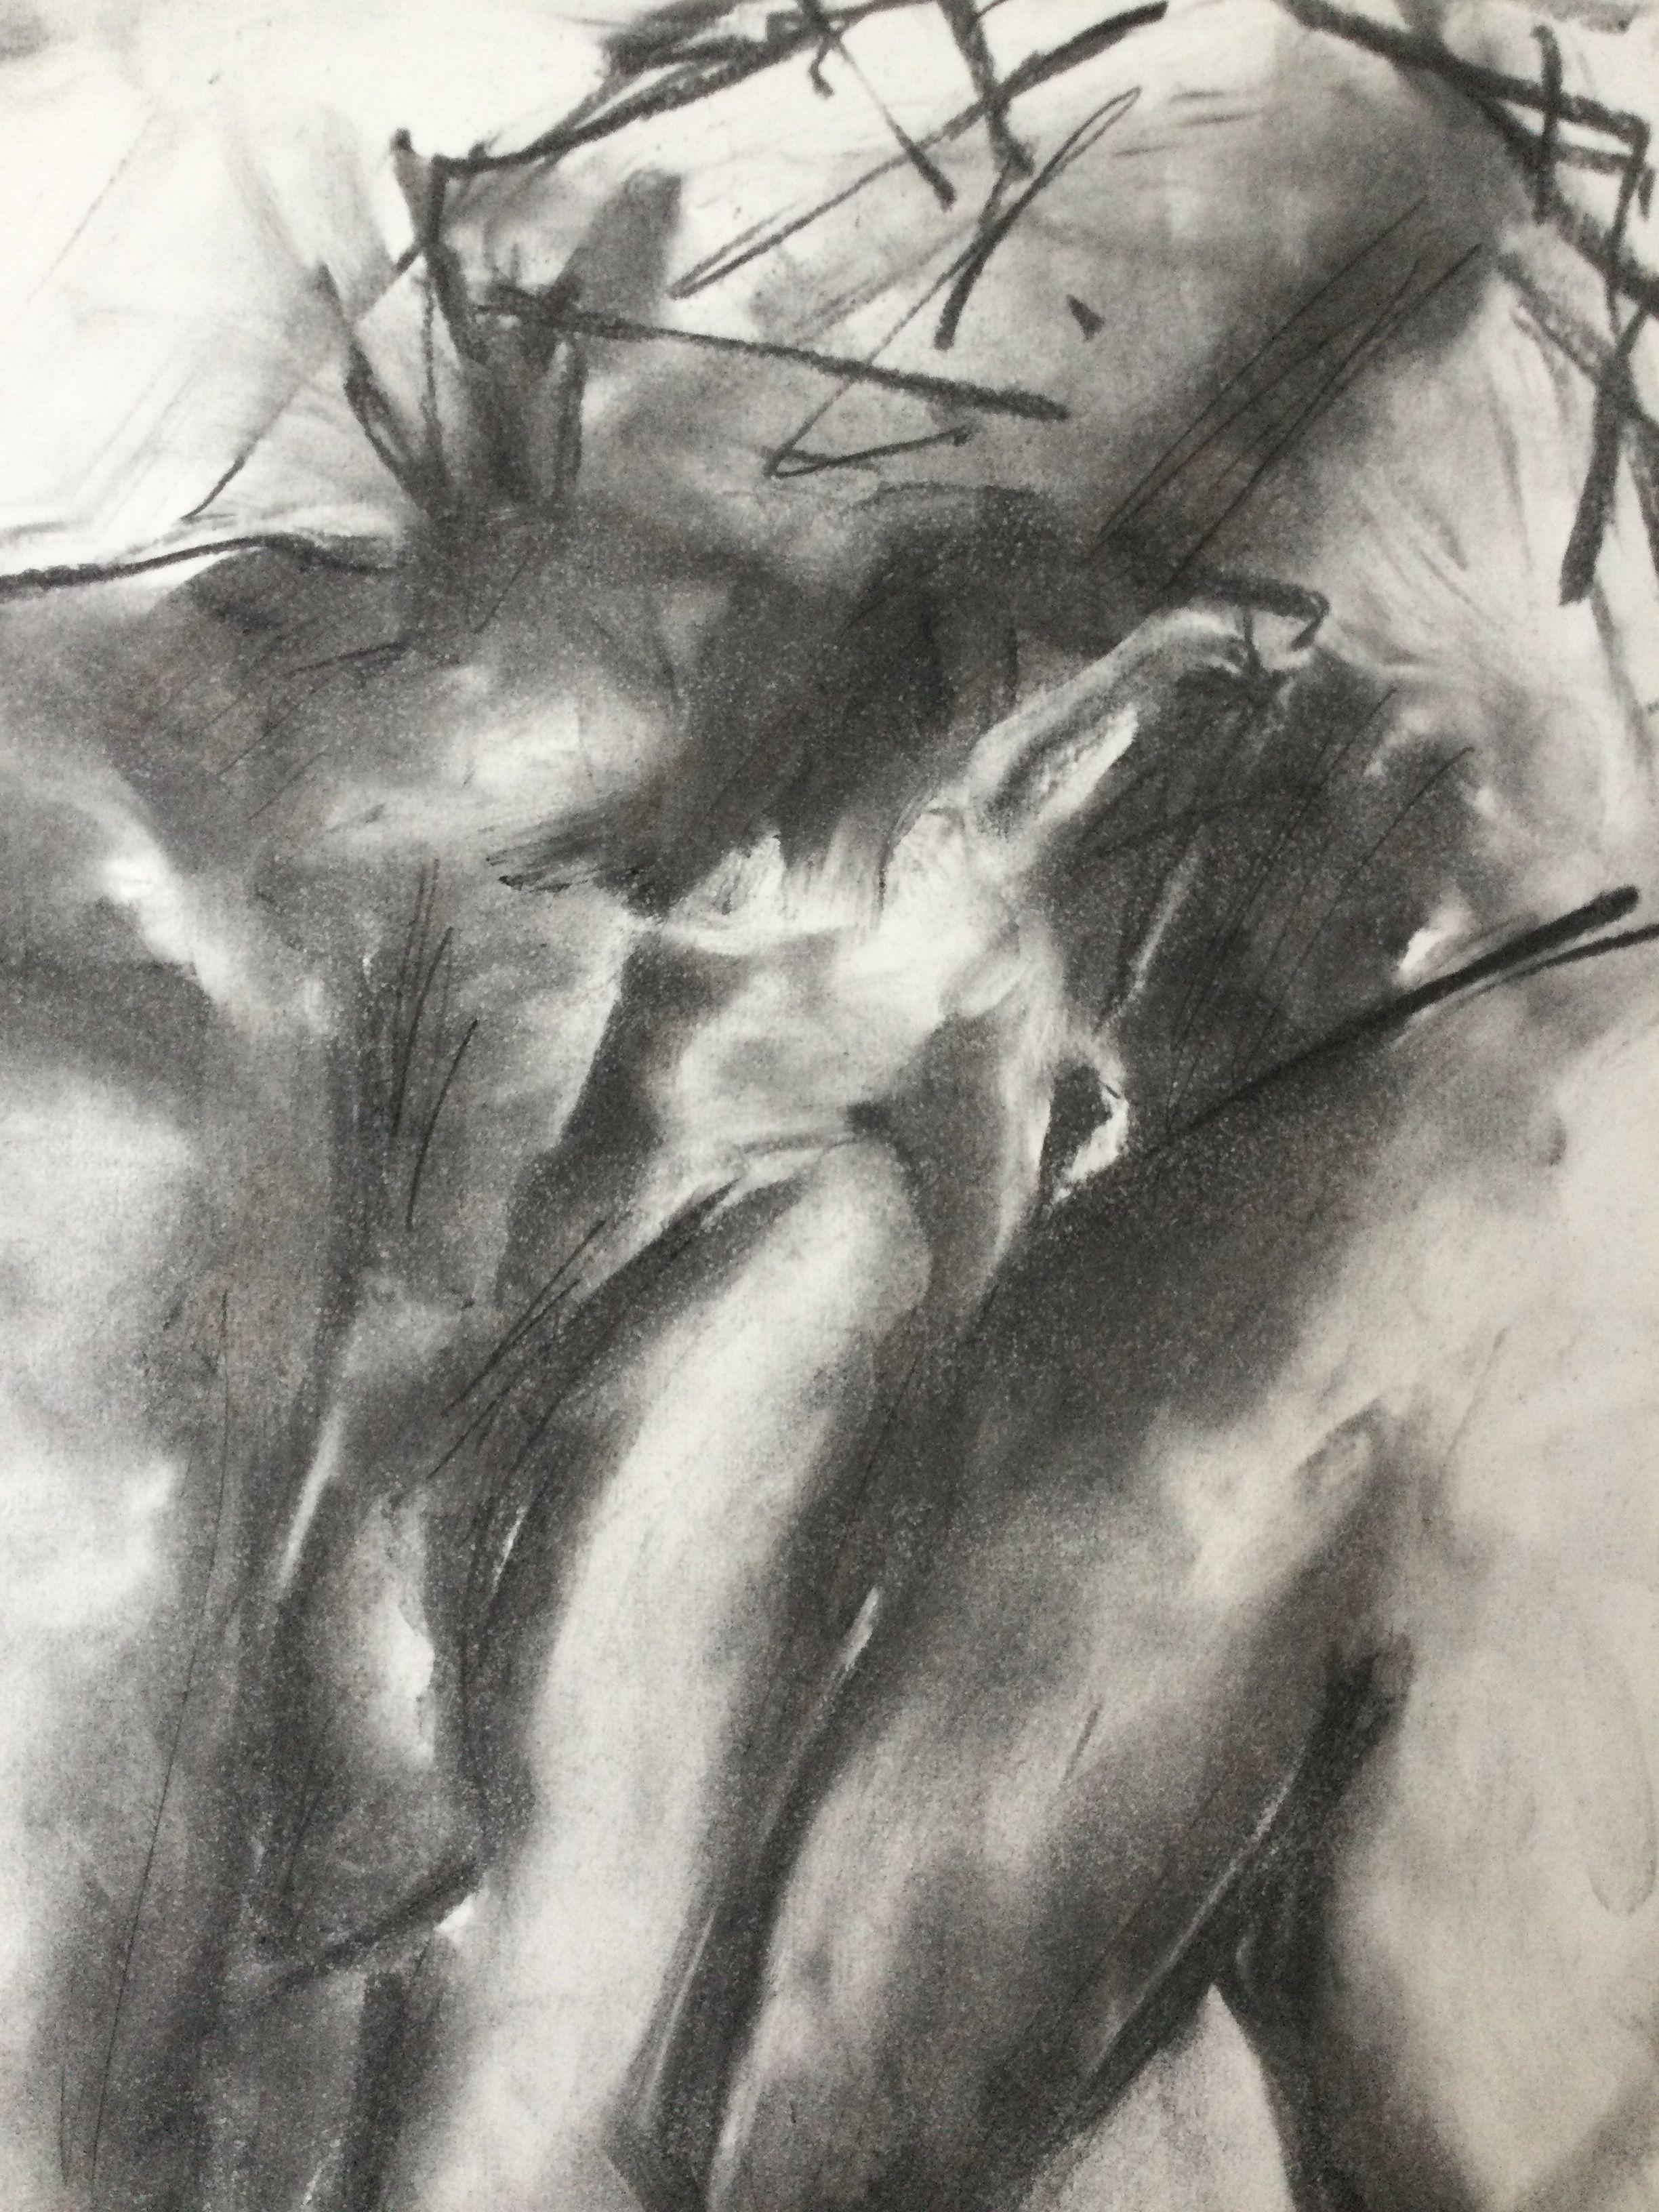 No Words, Drawing, Charcoal on Paper - Impressionist Art by James Shipton